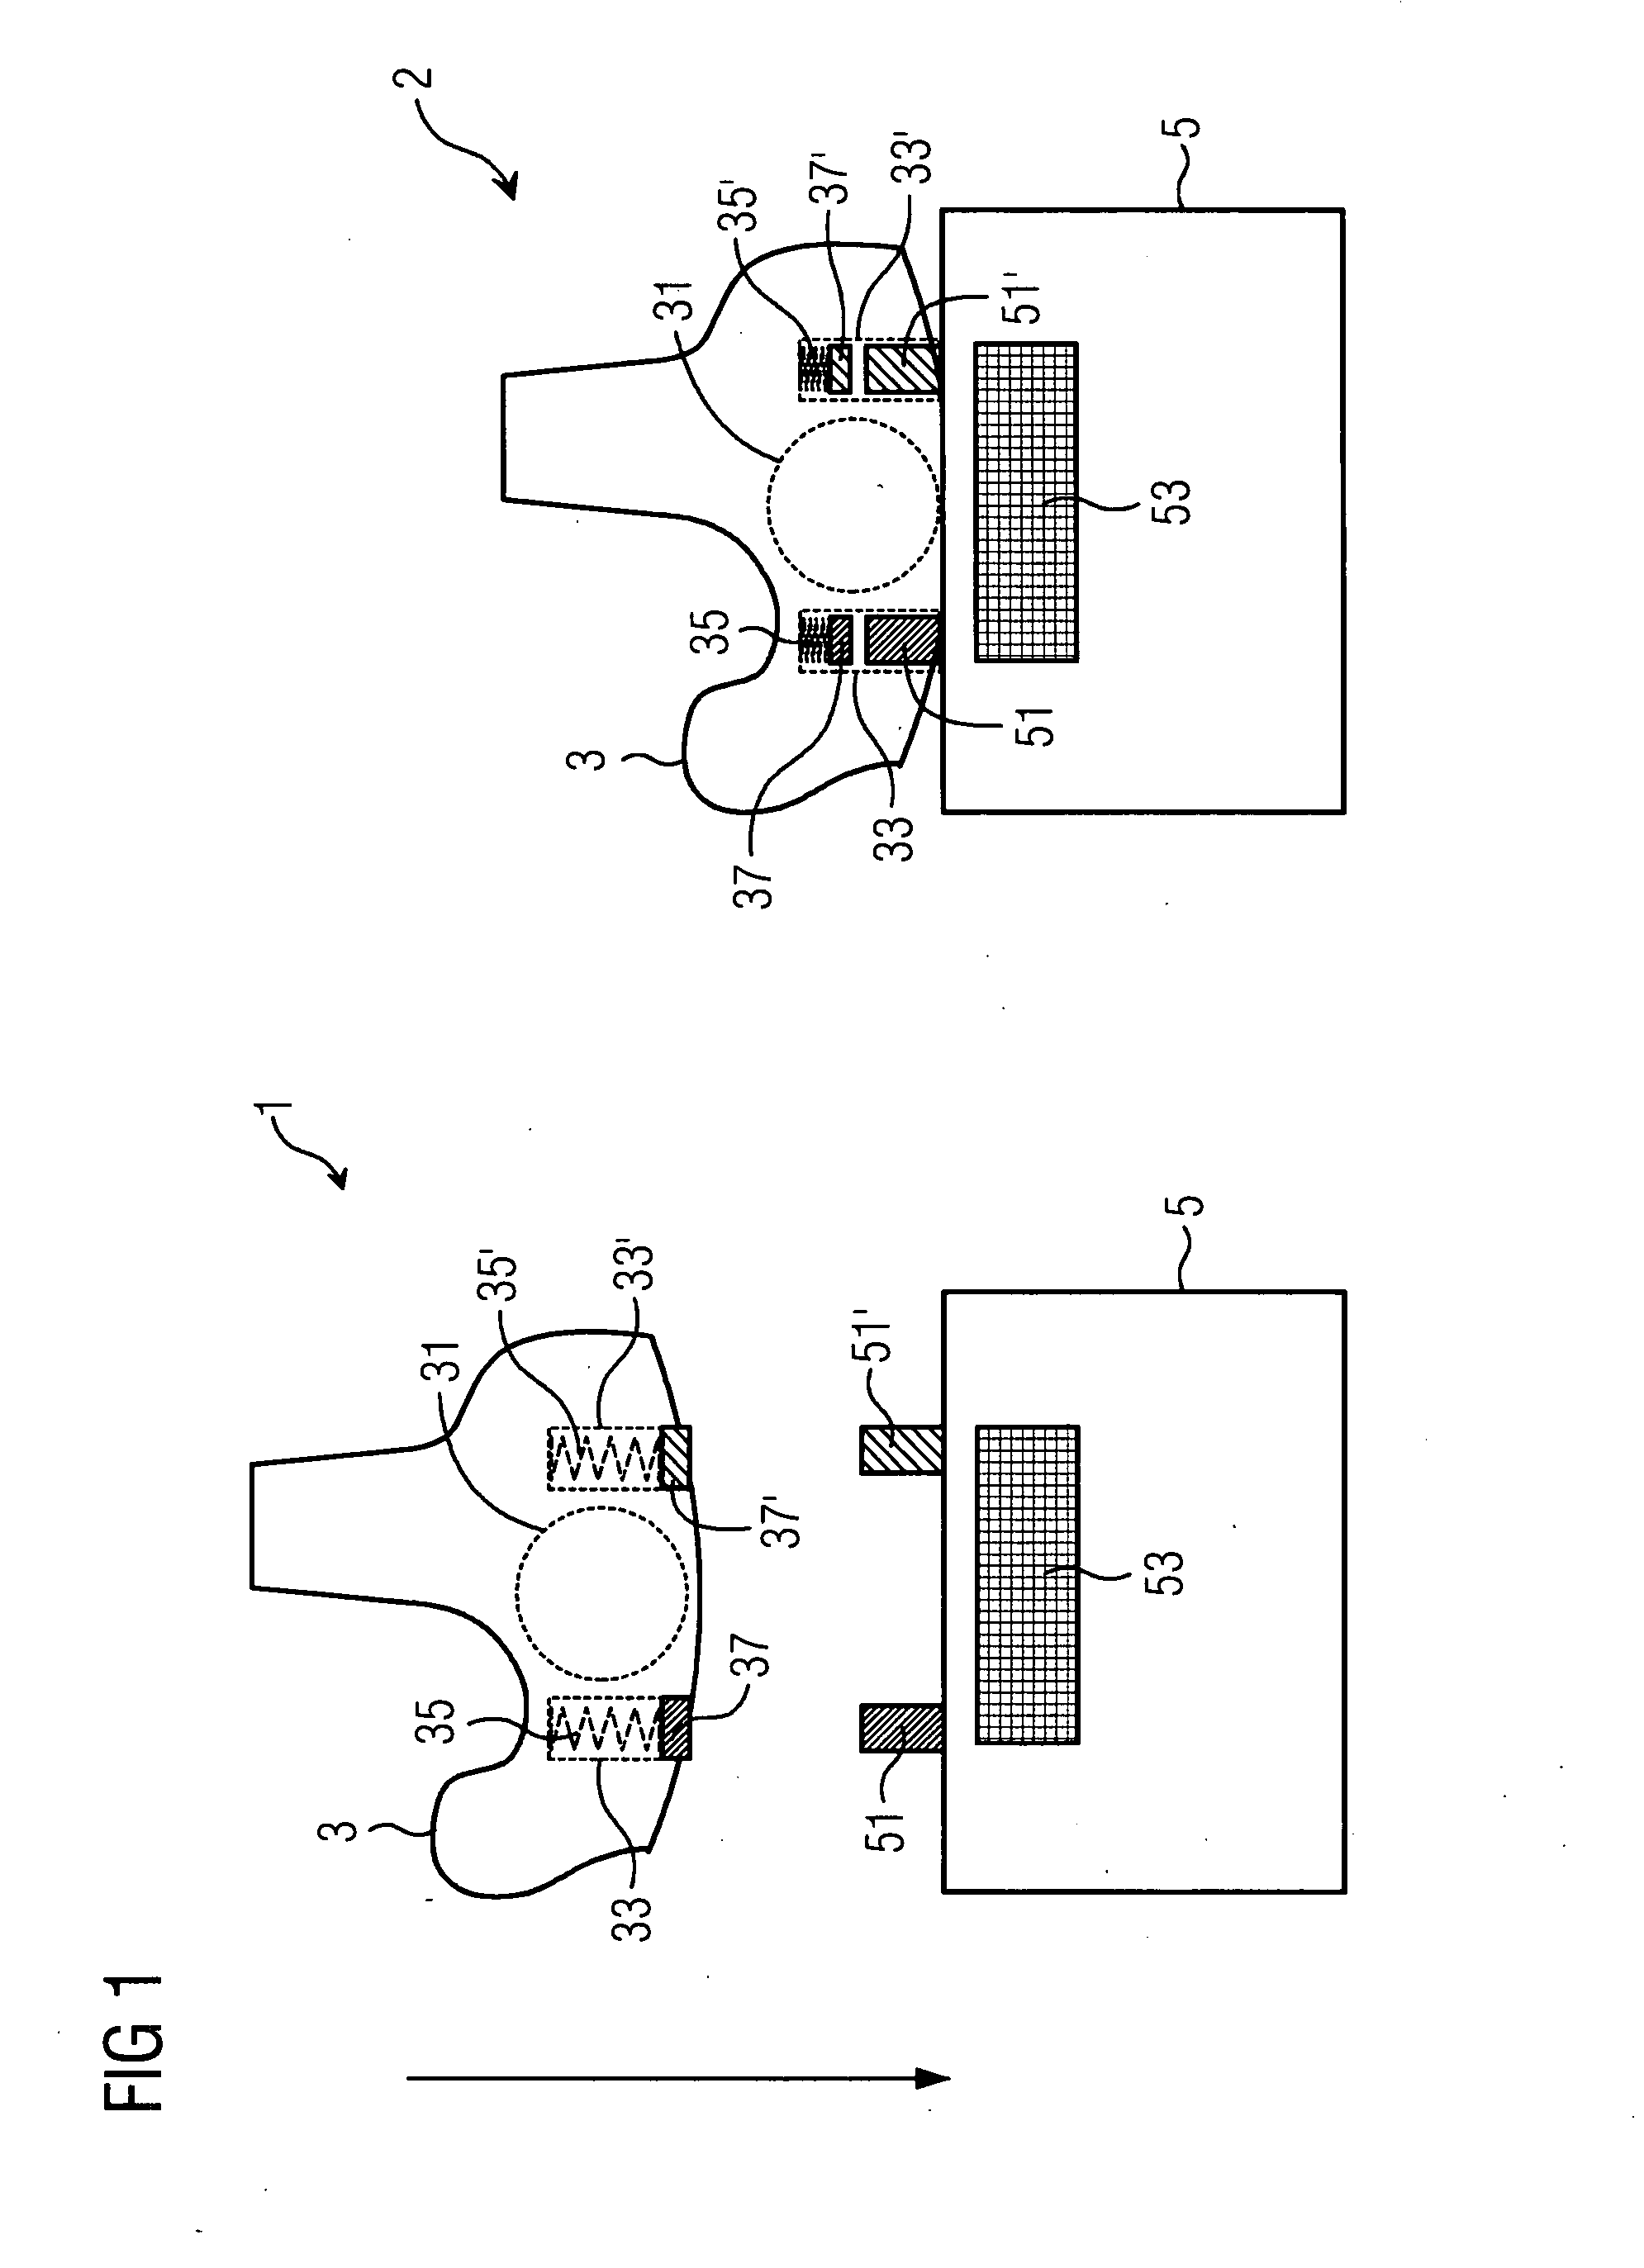 Charging device for hearing aid